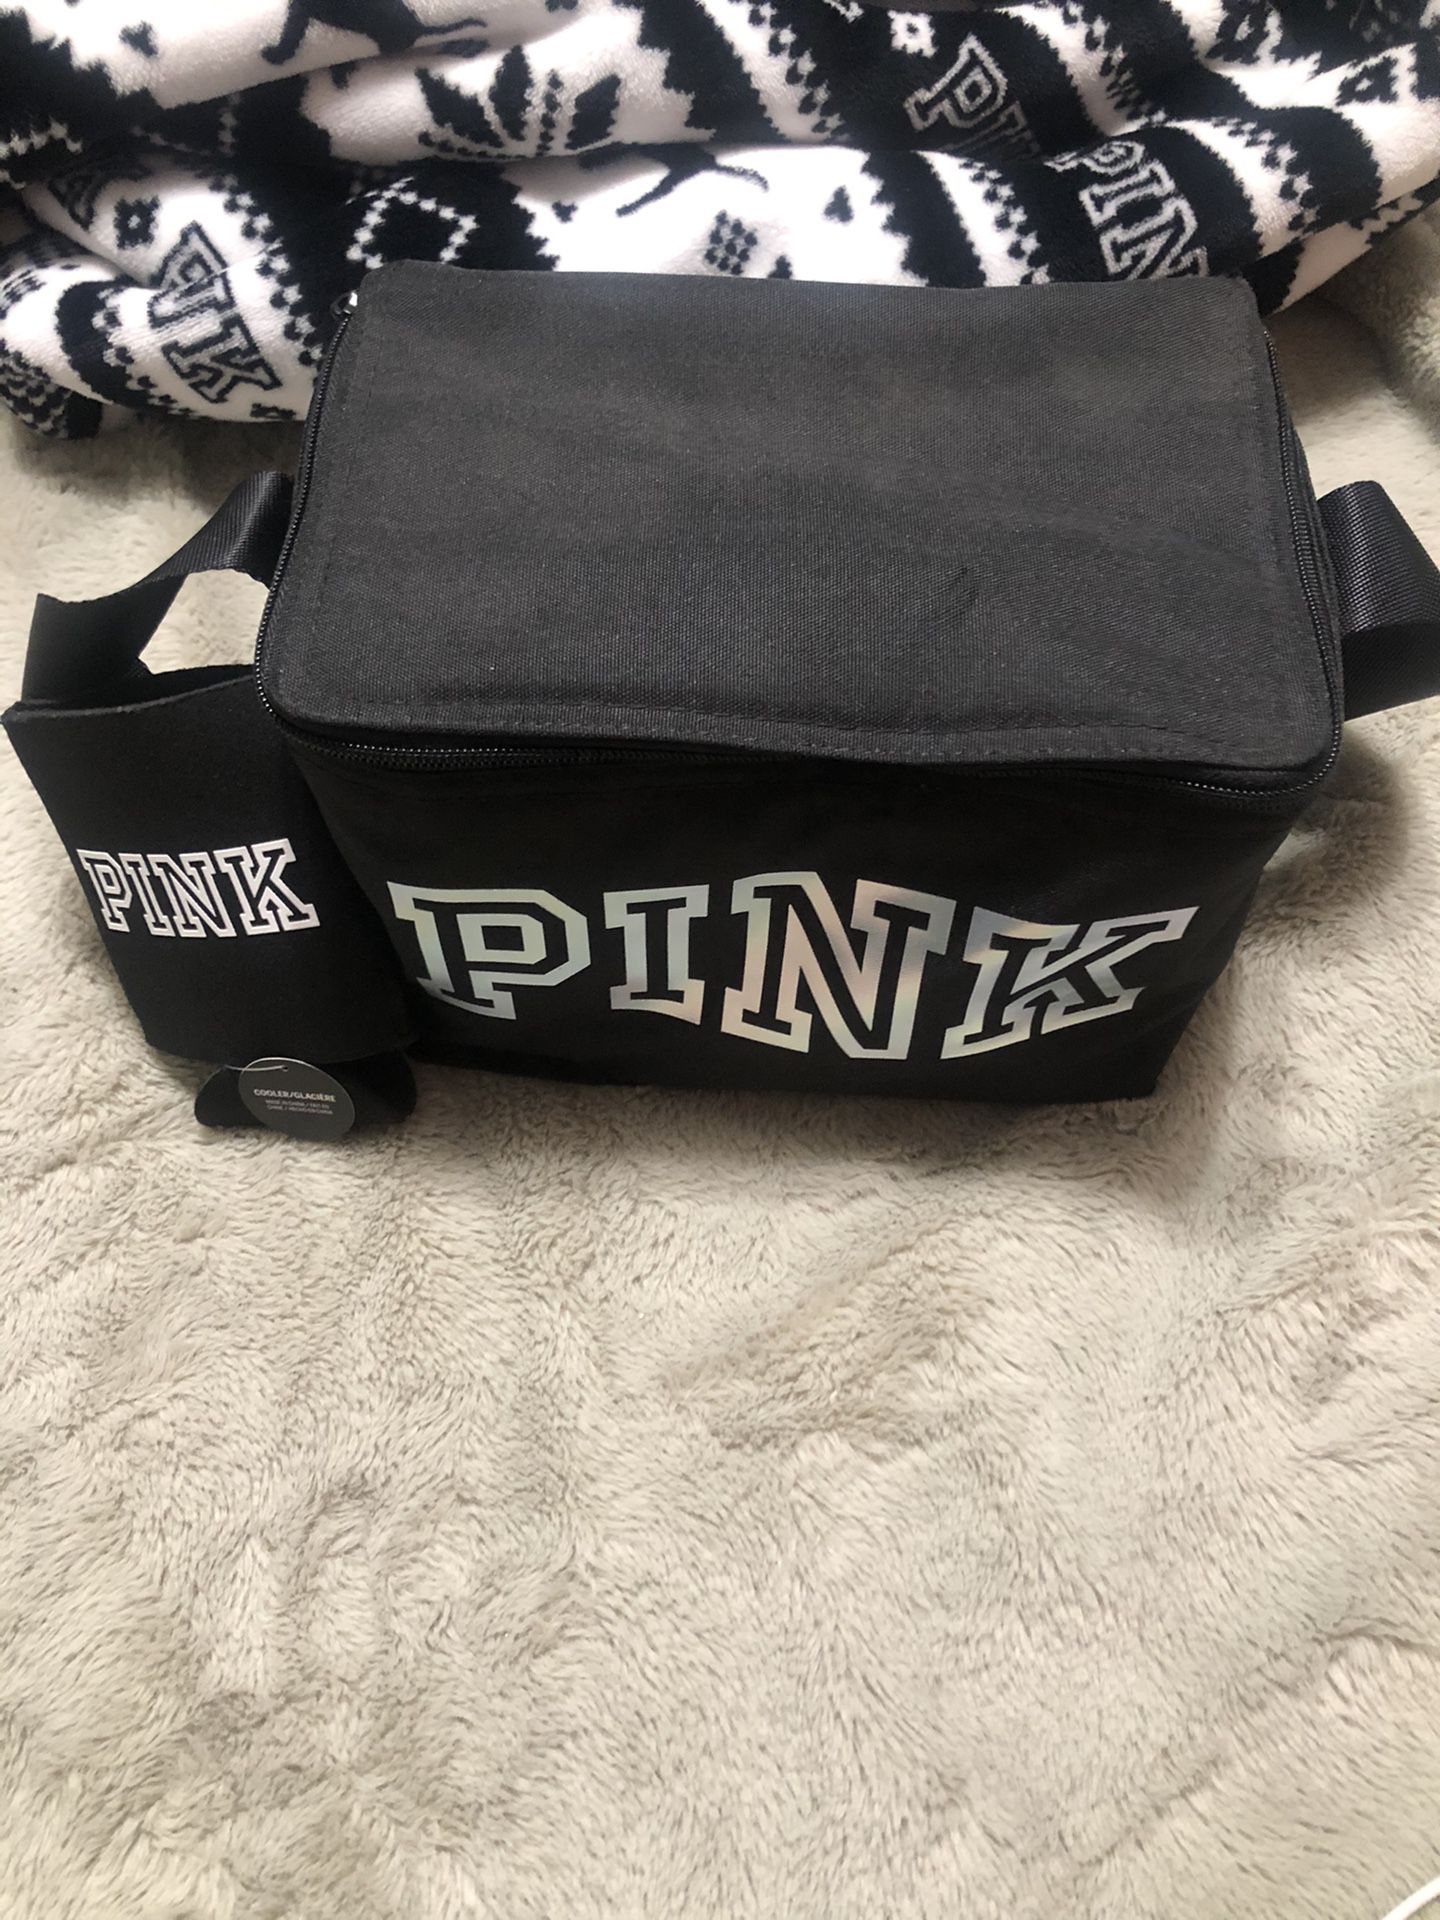 $15 pink lunch bag